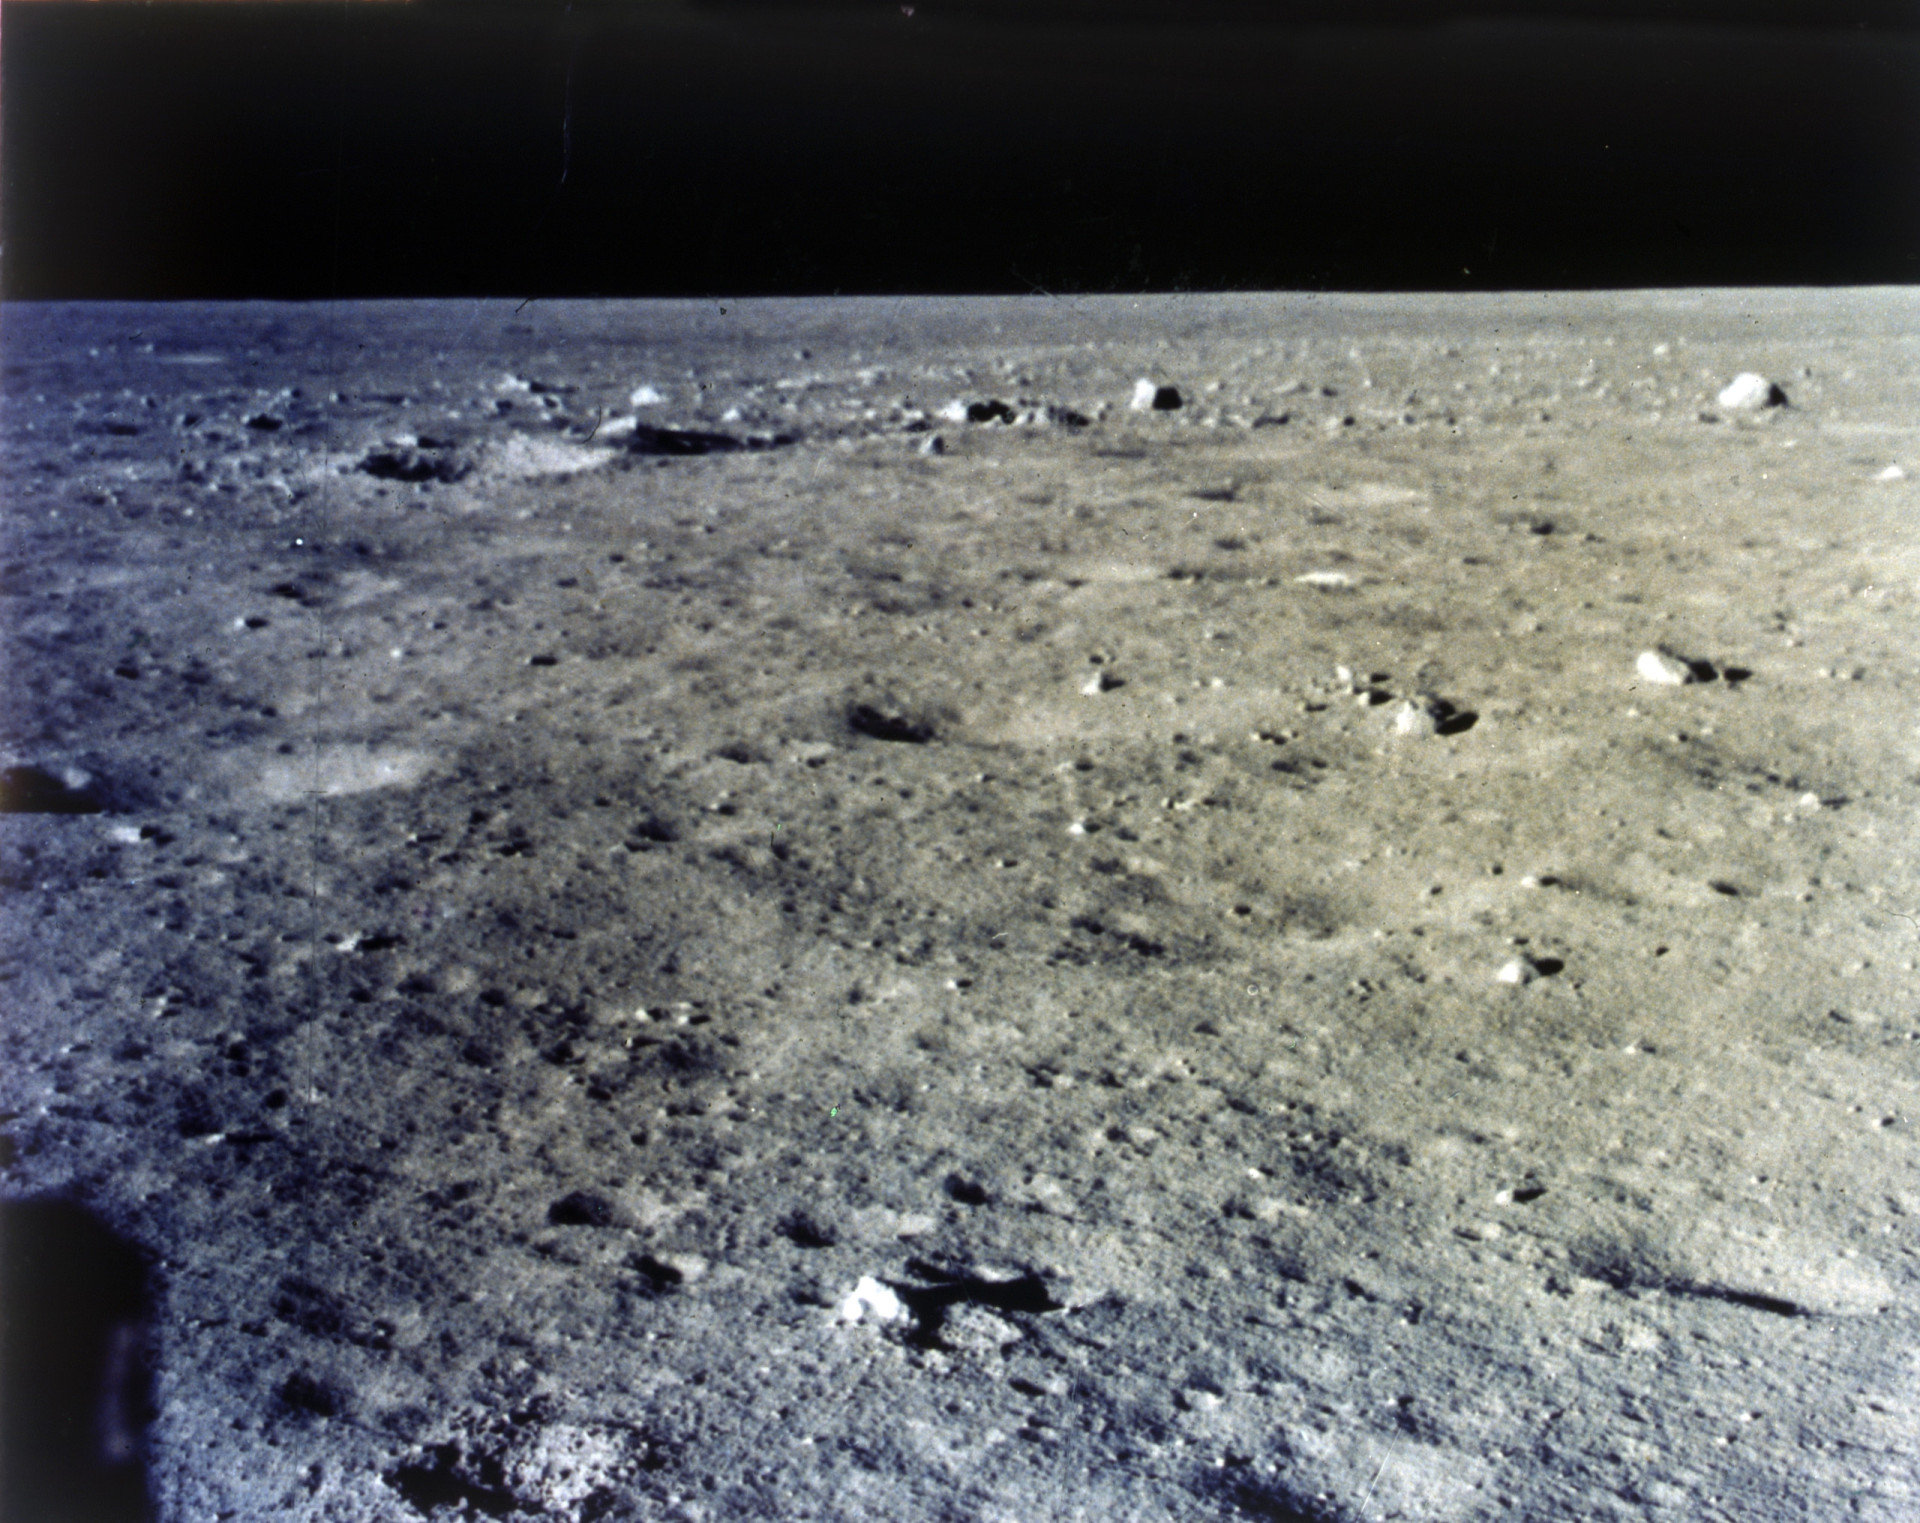 <p>The plan included the placement of three instruments on the Moon’s surface to take measurements. The instruments would collect data before, during, and after the explosion to better help understand the composition of the Moon.</p><p>You may also like:<a href="https://www.starsinsider.com/n/343987?utm_source=msn.com&utm_medium=display&utm_campaign=referral_description&utm_content=713901en-en"> Bandmates who shared intimate encounters</a></p>